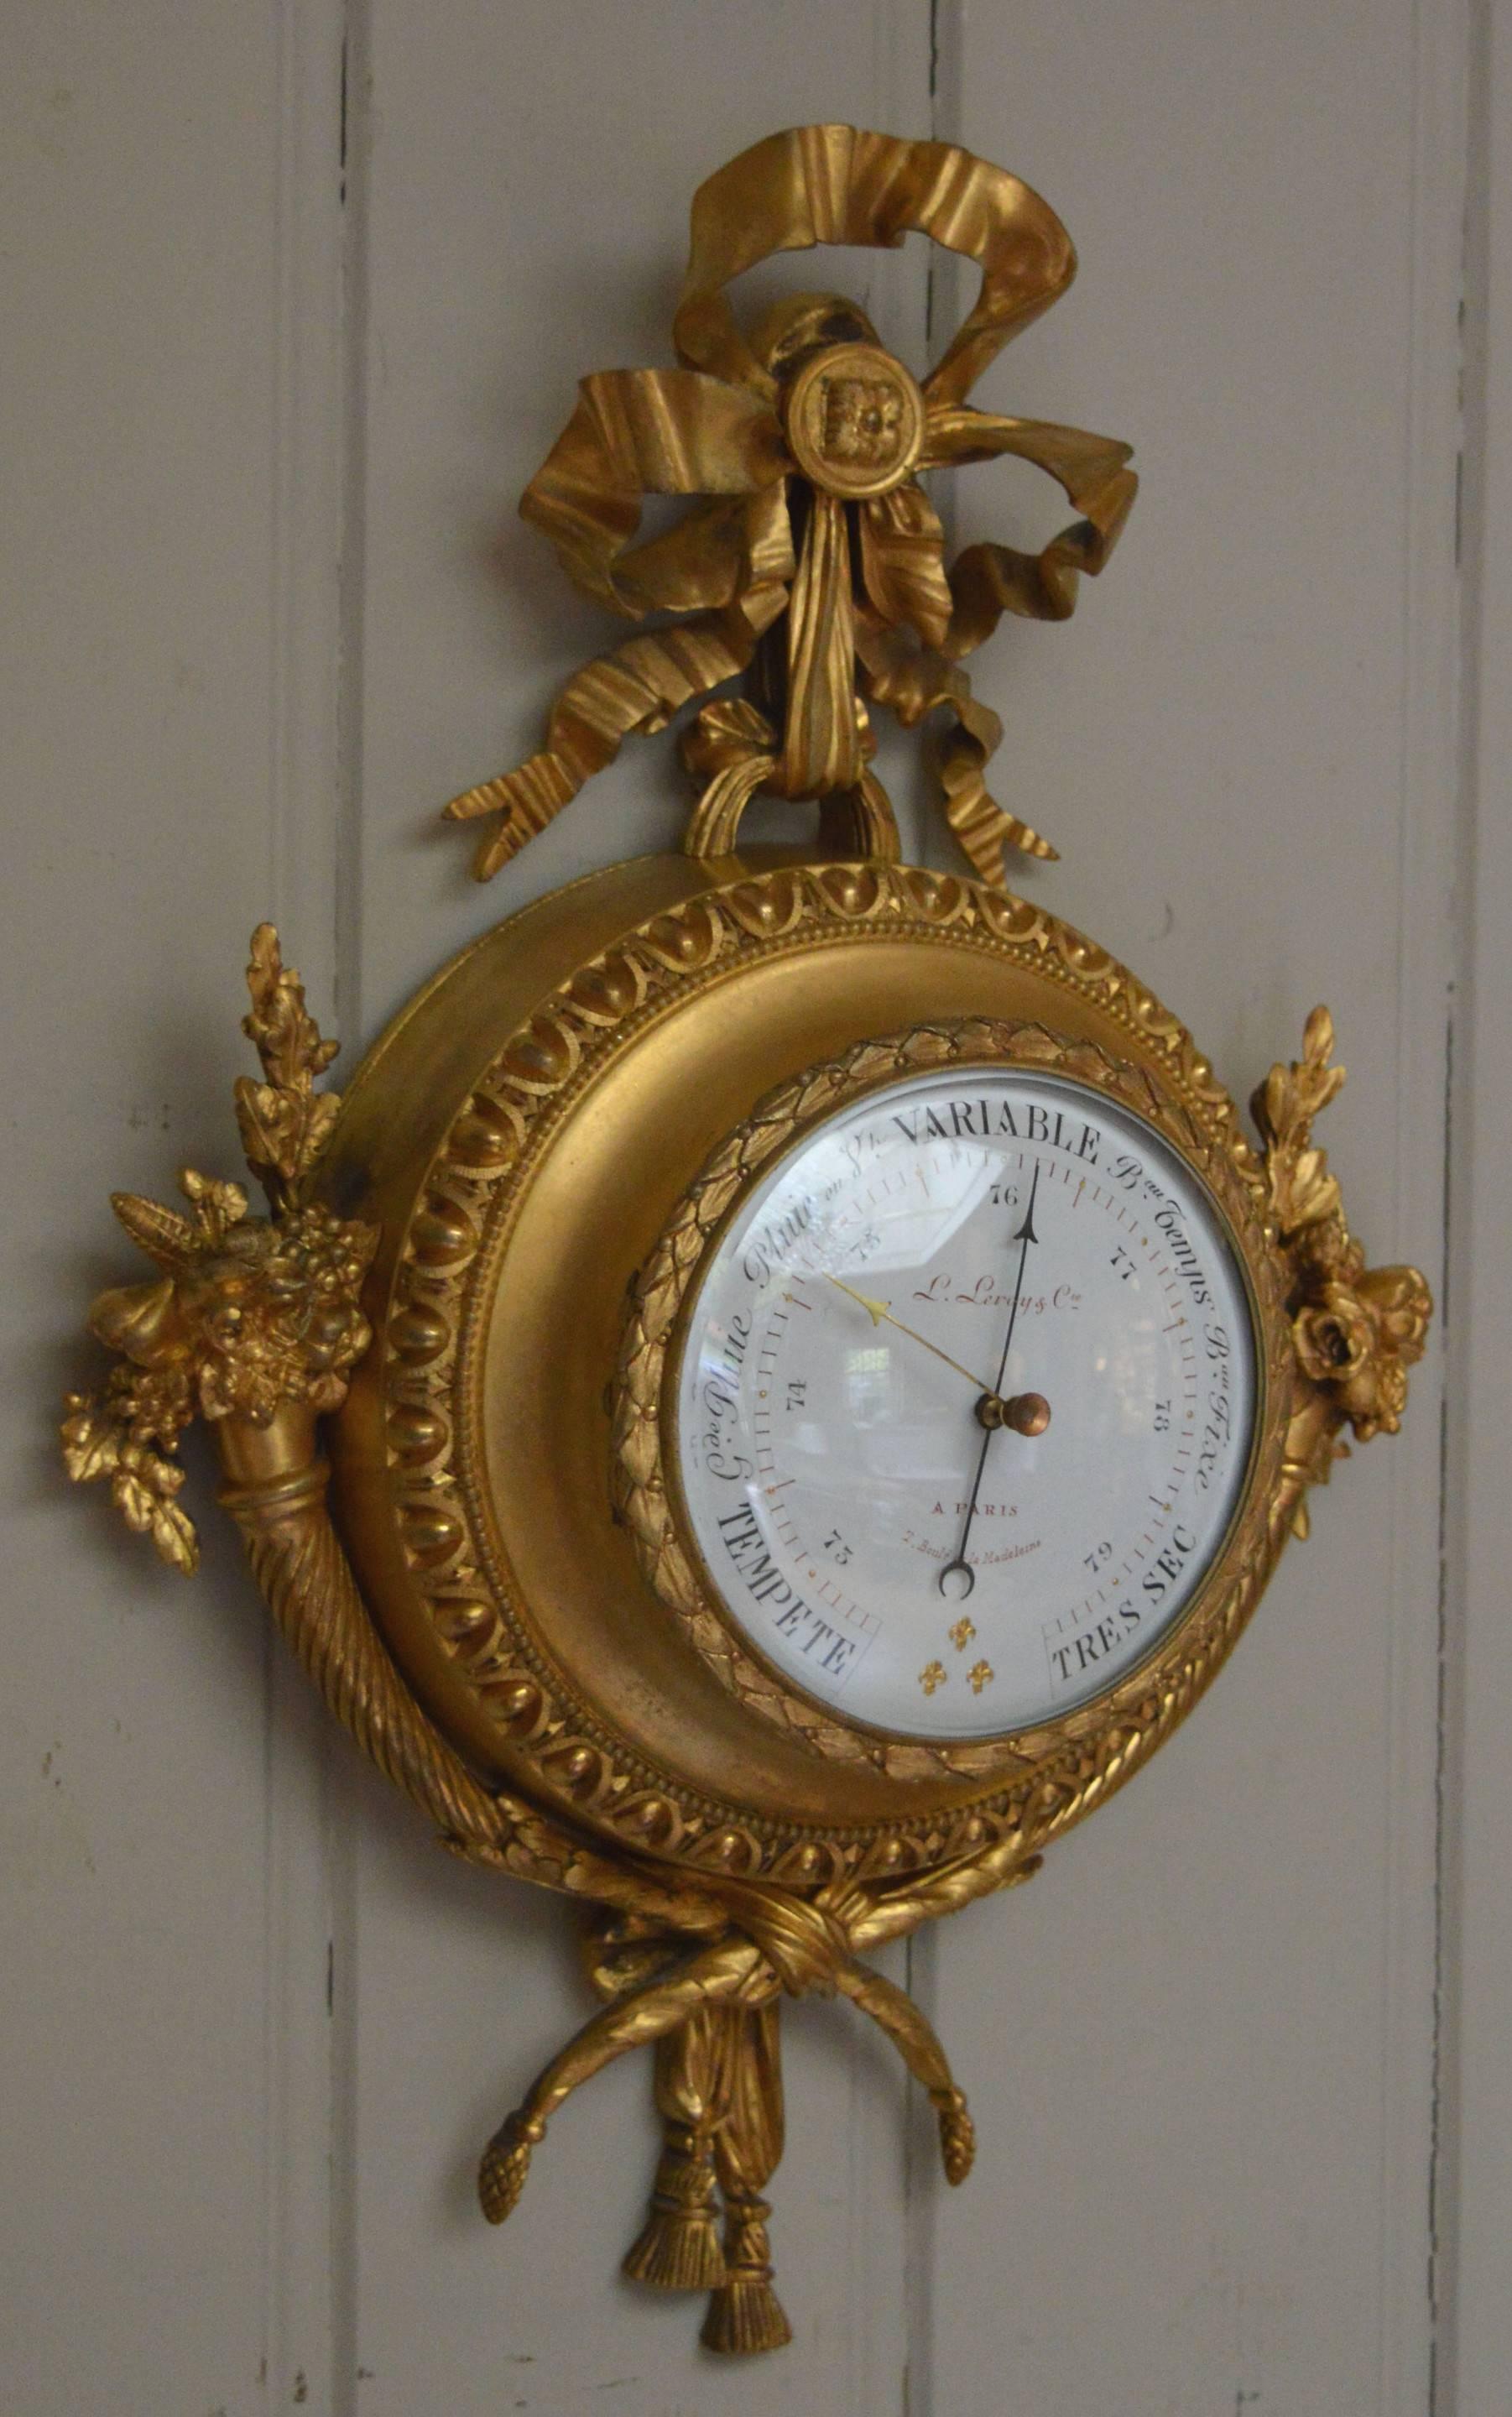 A very unusual late 19th Century aneroid barometer. It has a Louis XVI style case embossed with swags and floral garlands and ribbons. It has a high dome glass and an enamel dial signed by th maker L. Le Roy of Paris.